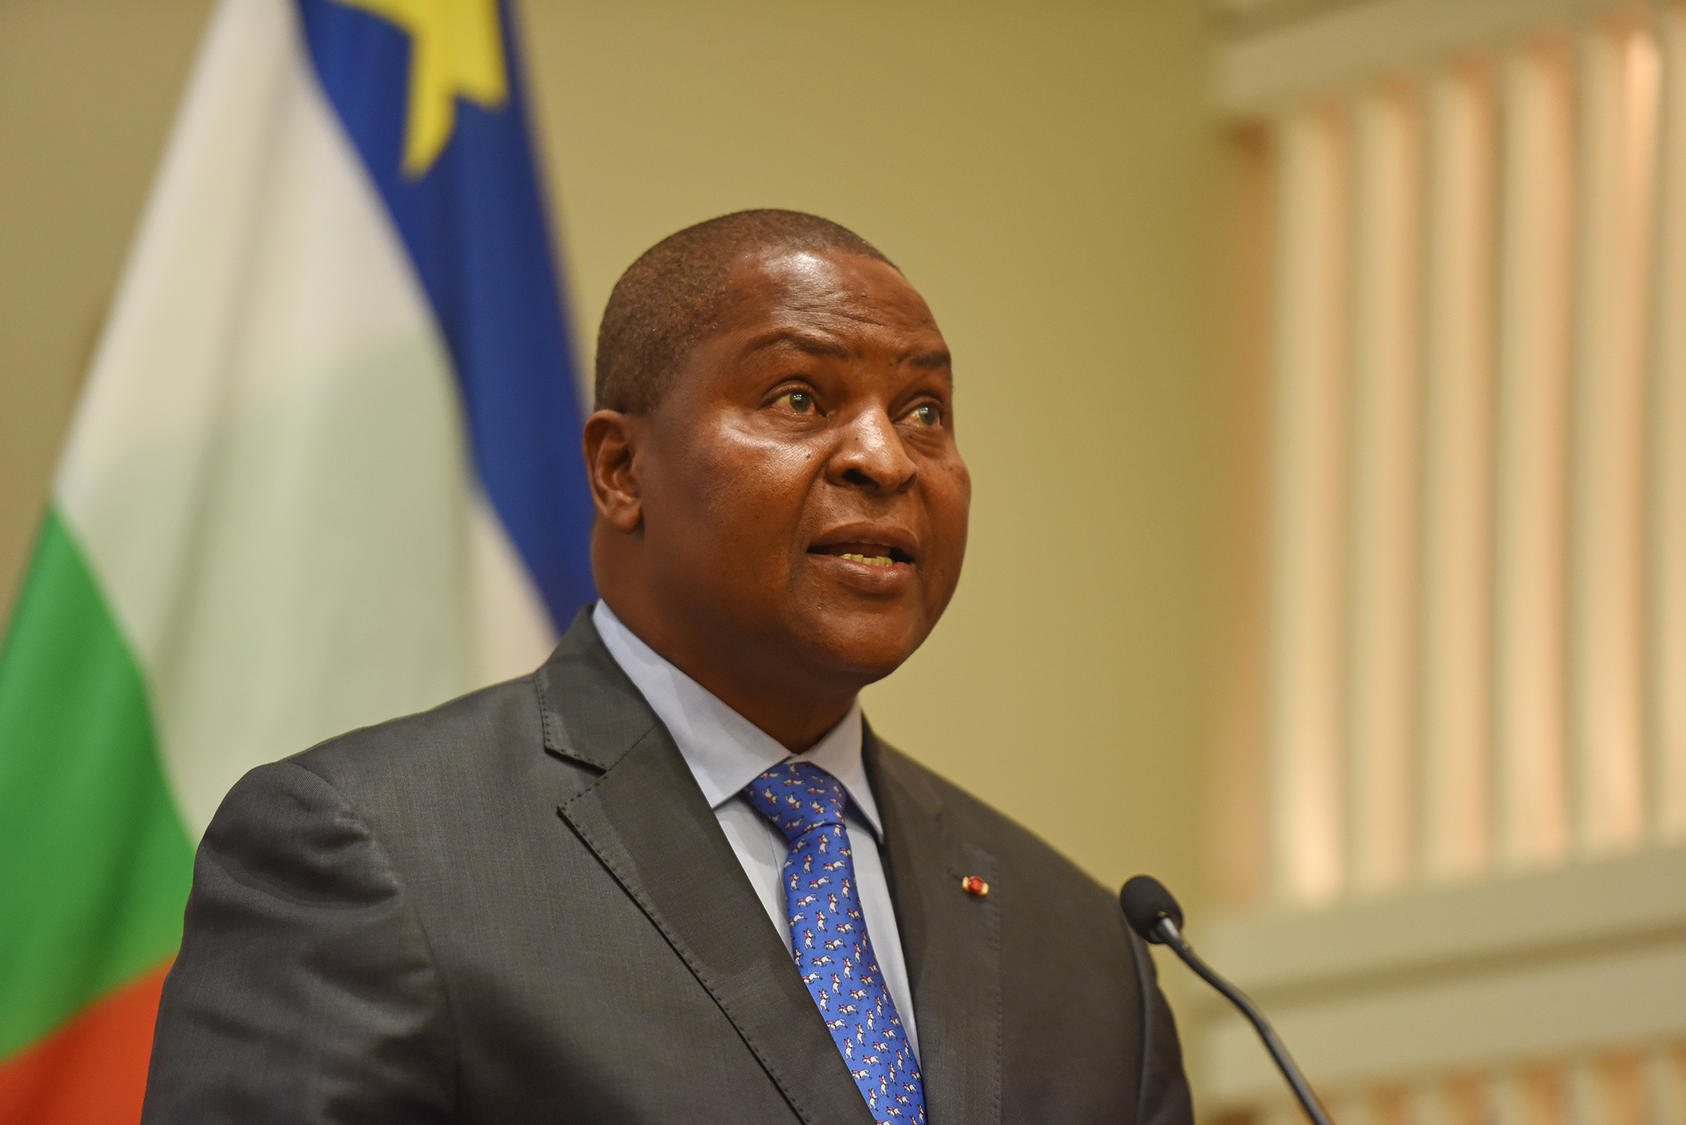 Central African Republic President Faustin-Archange Touadéra has announced the Bitcoin is now an official currency in the country, making it only the second country in the world to do so.